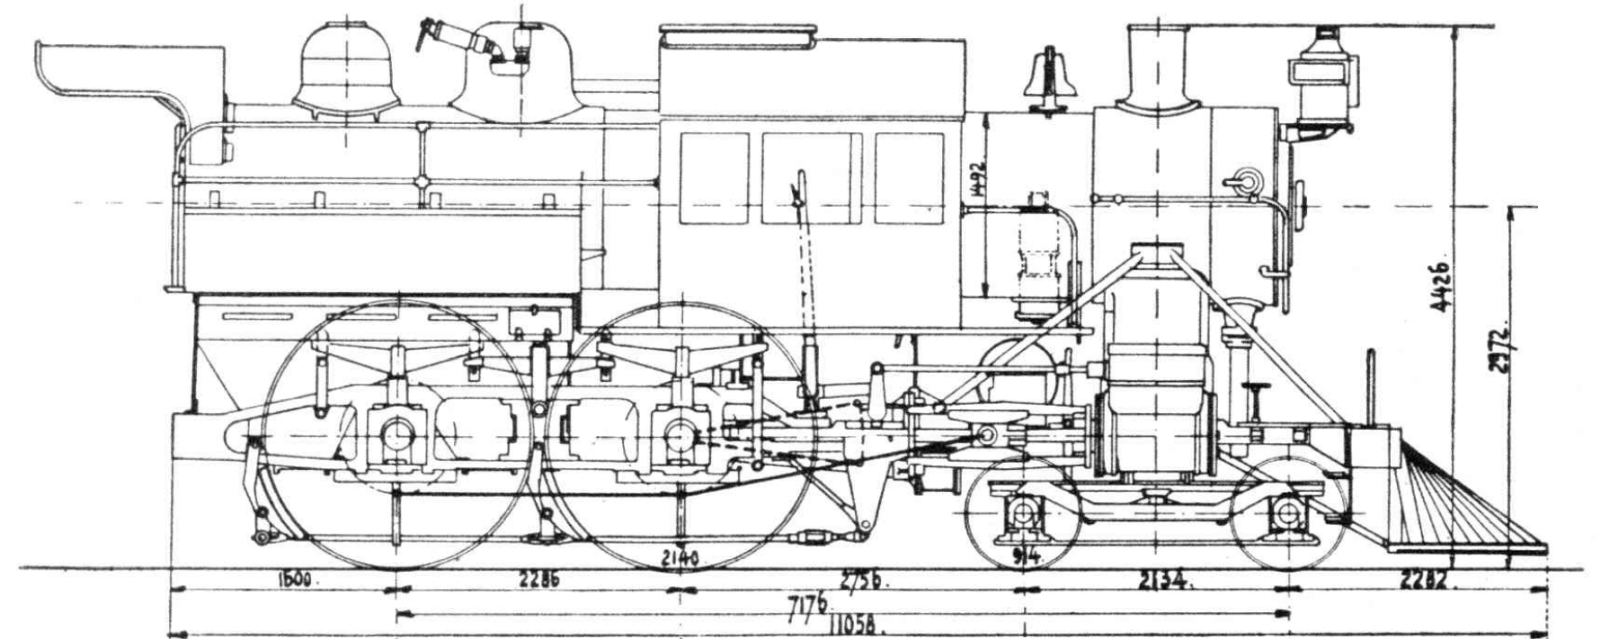 Schematic drawing after the rebuild as 4-4-0